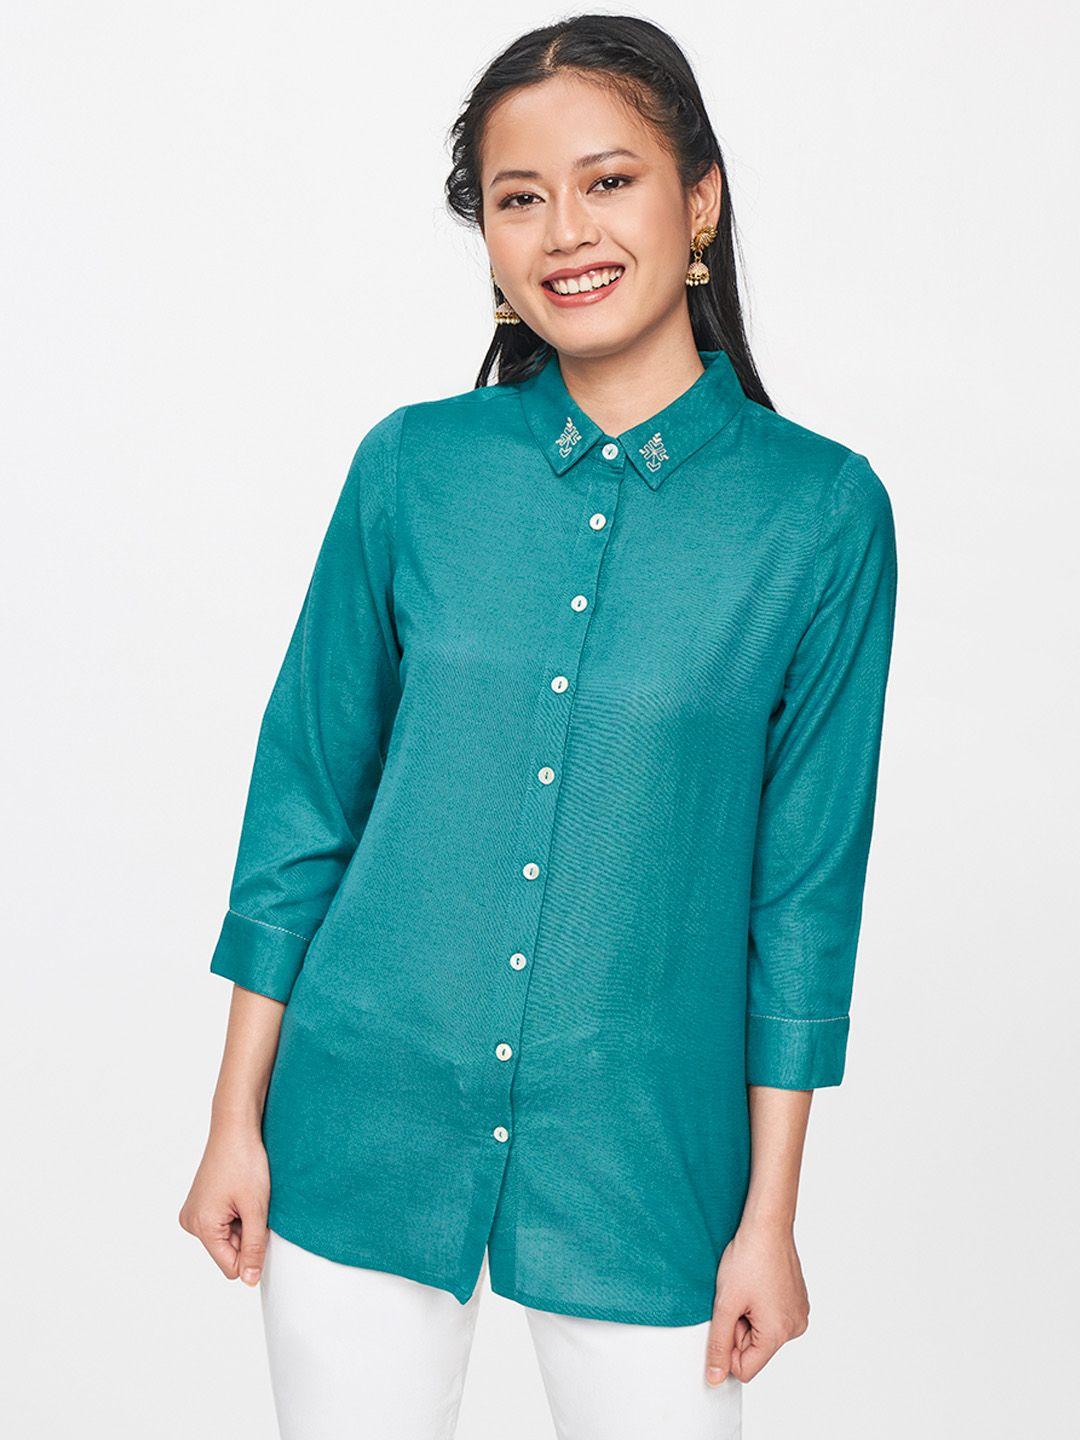 global-desi-turquoise-blue-shirt-style-top-with-embroidered-detail